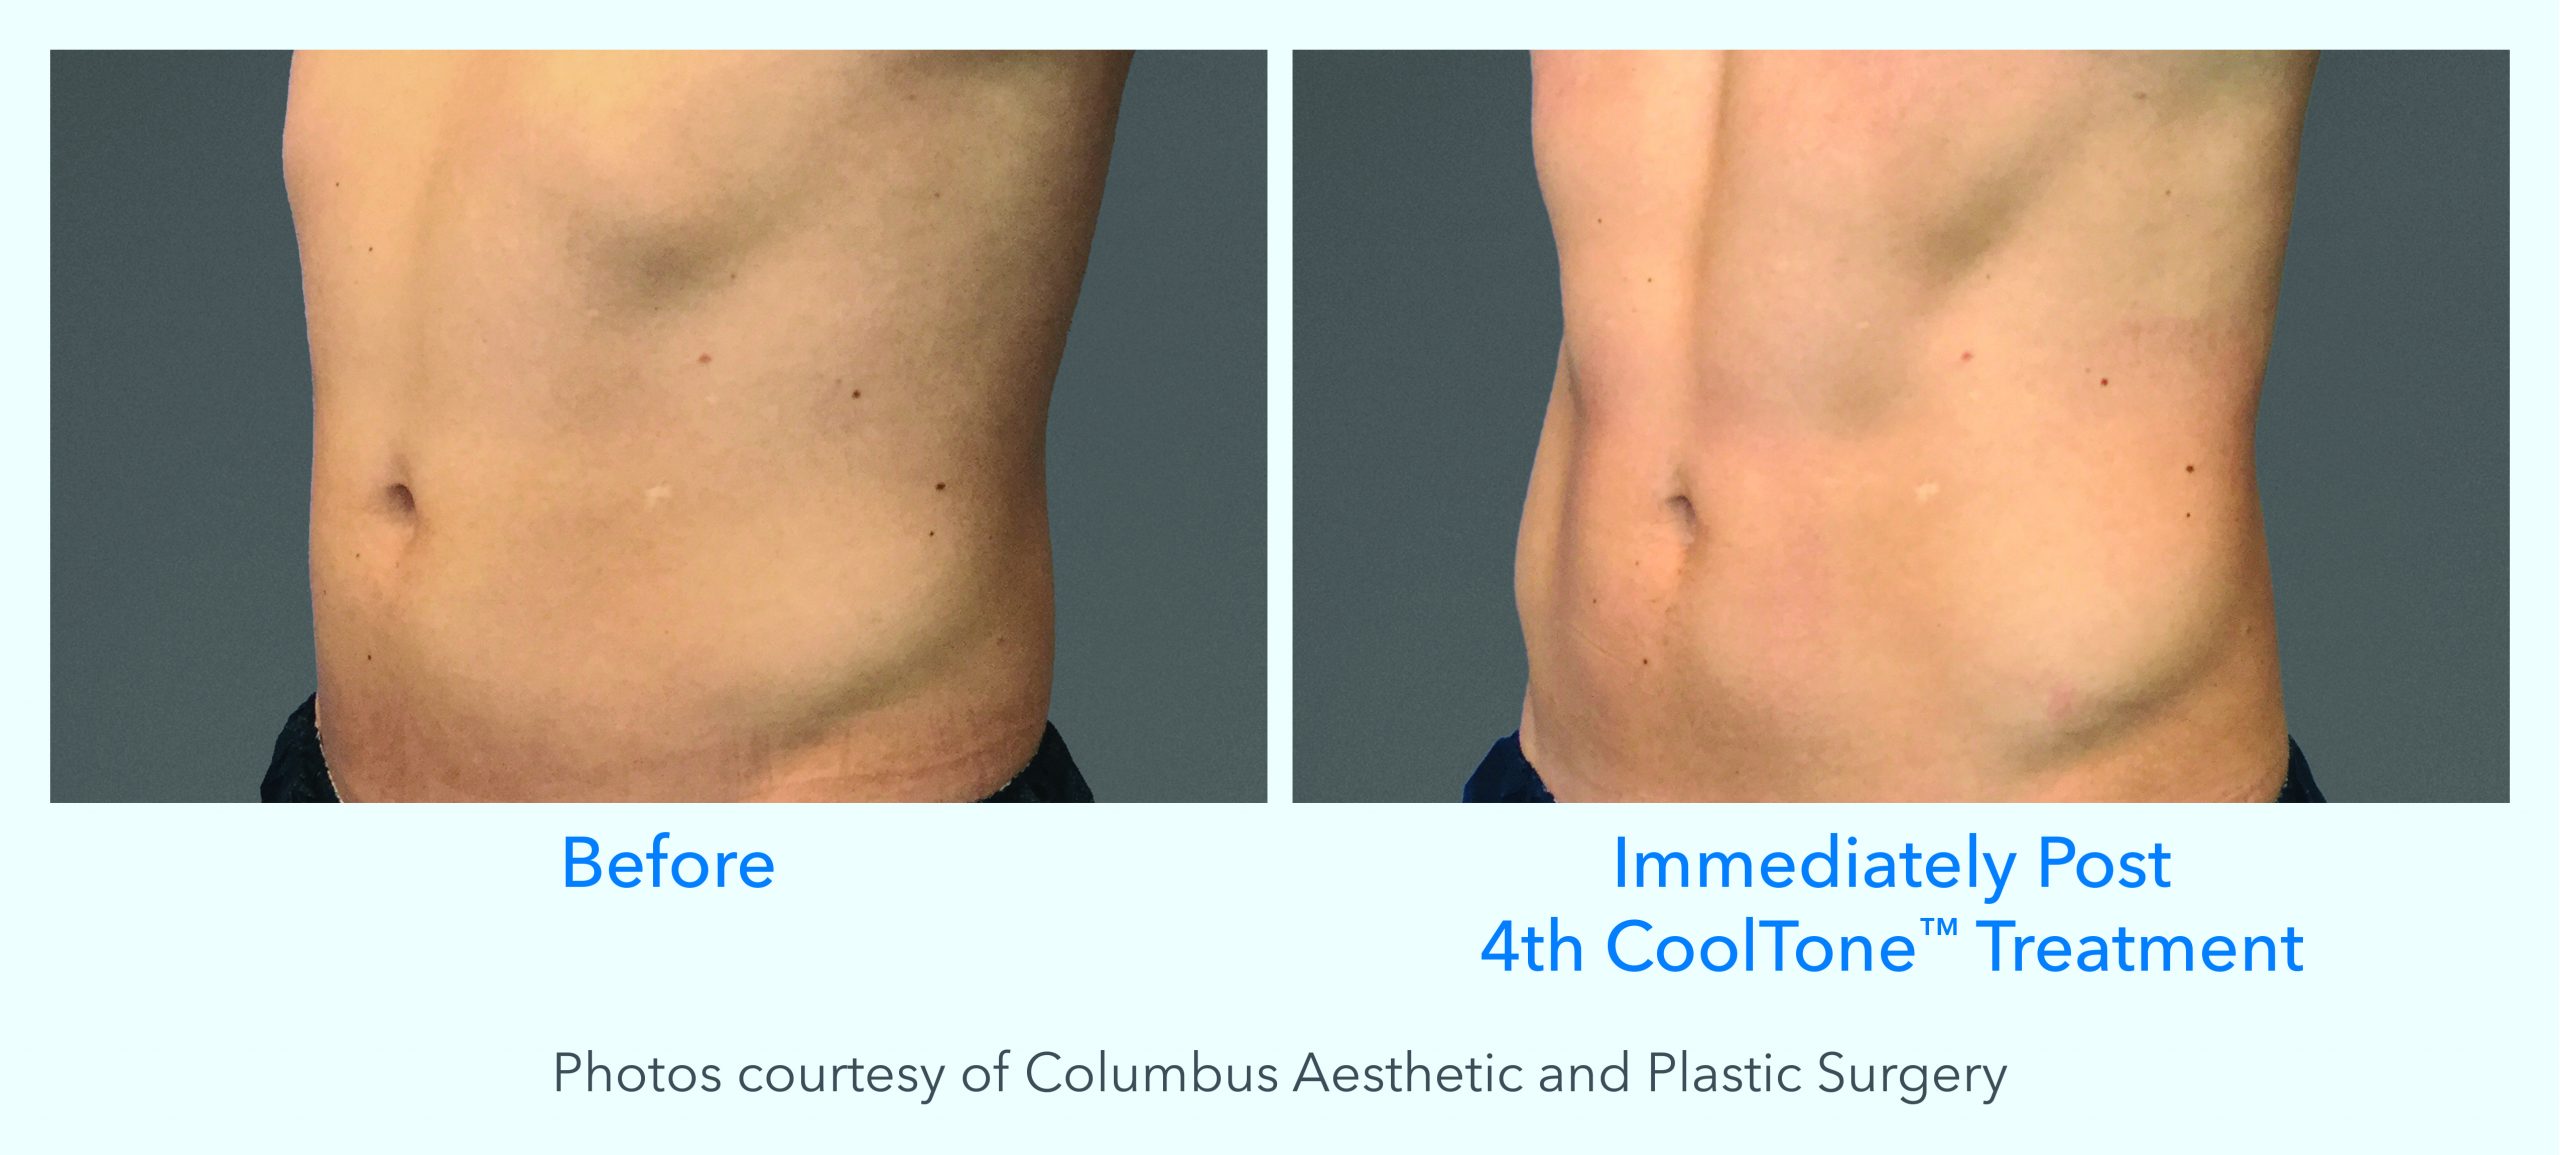 CoolTone Before and After Male Abdomen 1